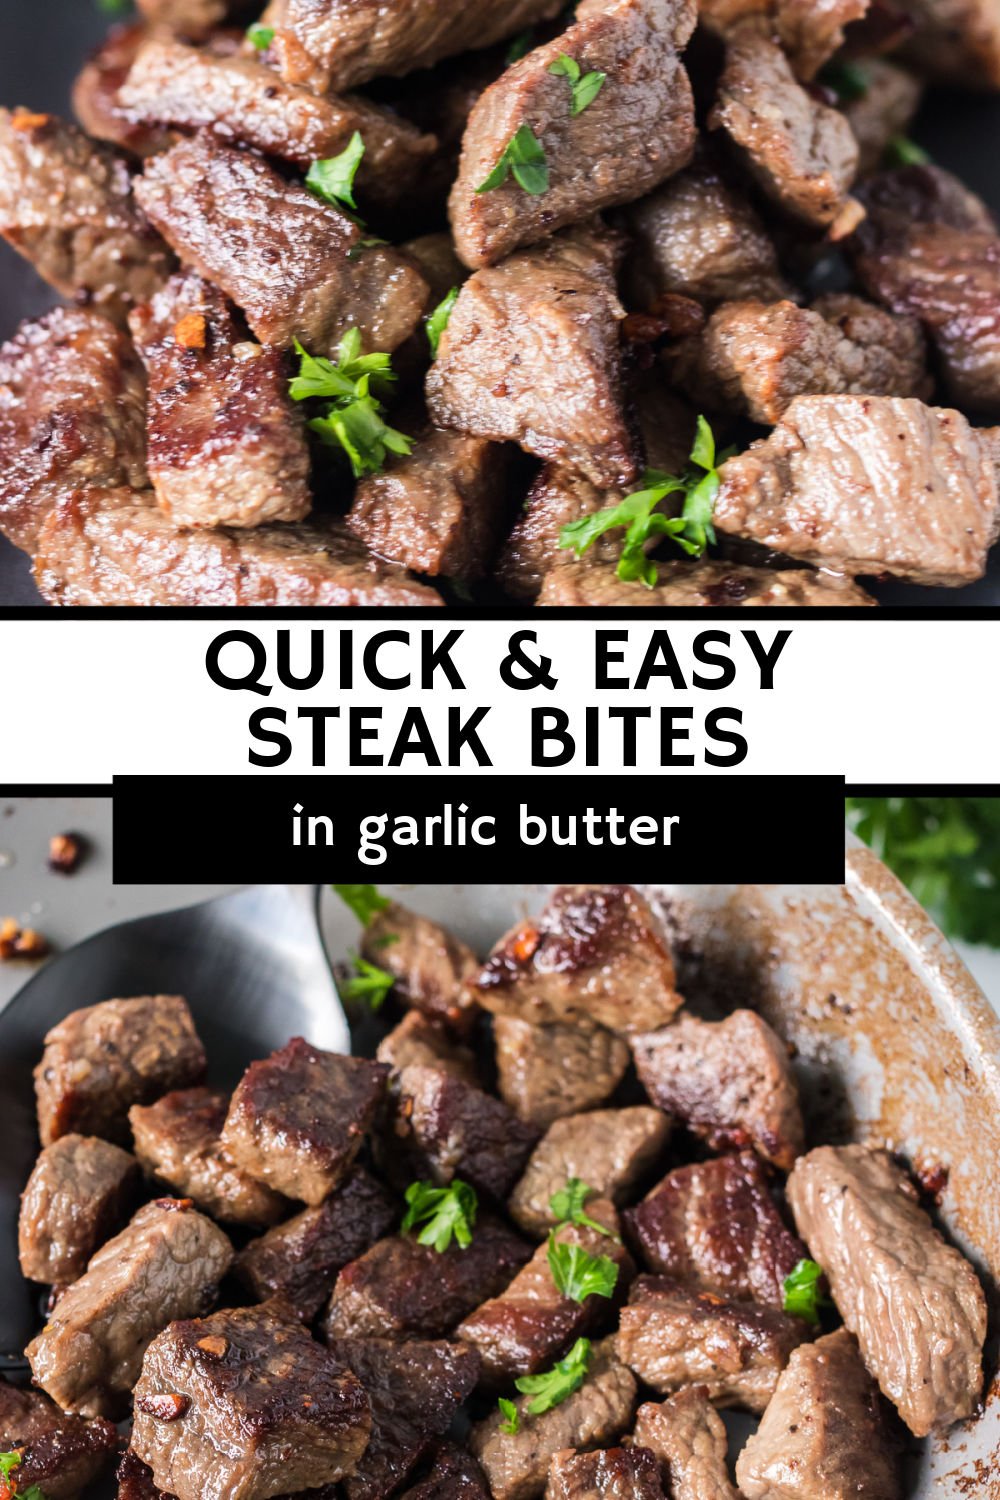 Garlic Steak Bites take just minutes to prepare...and minutes to eat! Served as a main dish with sides or as an appetizer, these bites are perfectly seasoned with just salt, pepper, garlic, and butter. | www.persnicketyplates.com